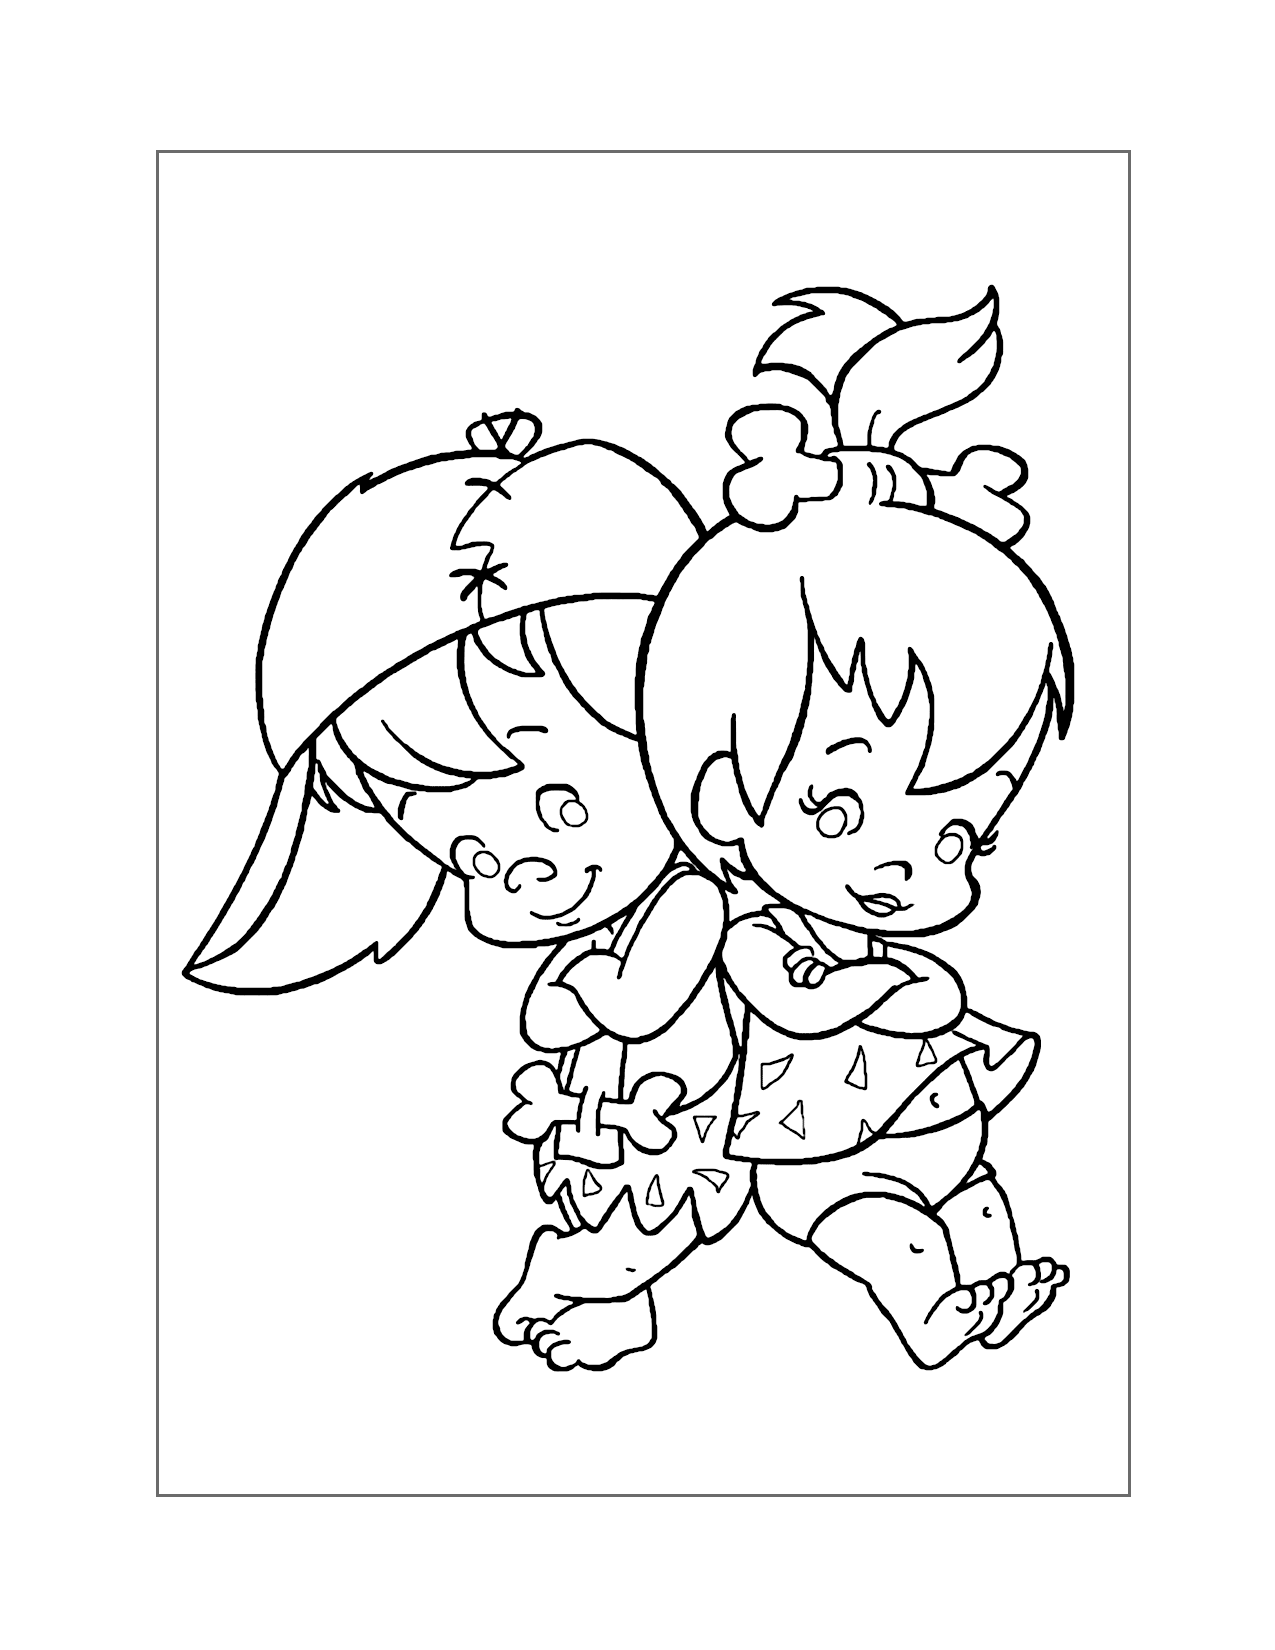 Pebbles And Bam Bam Coloring Page